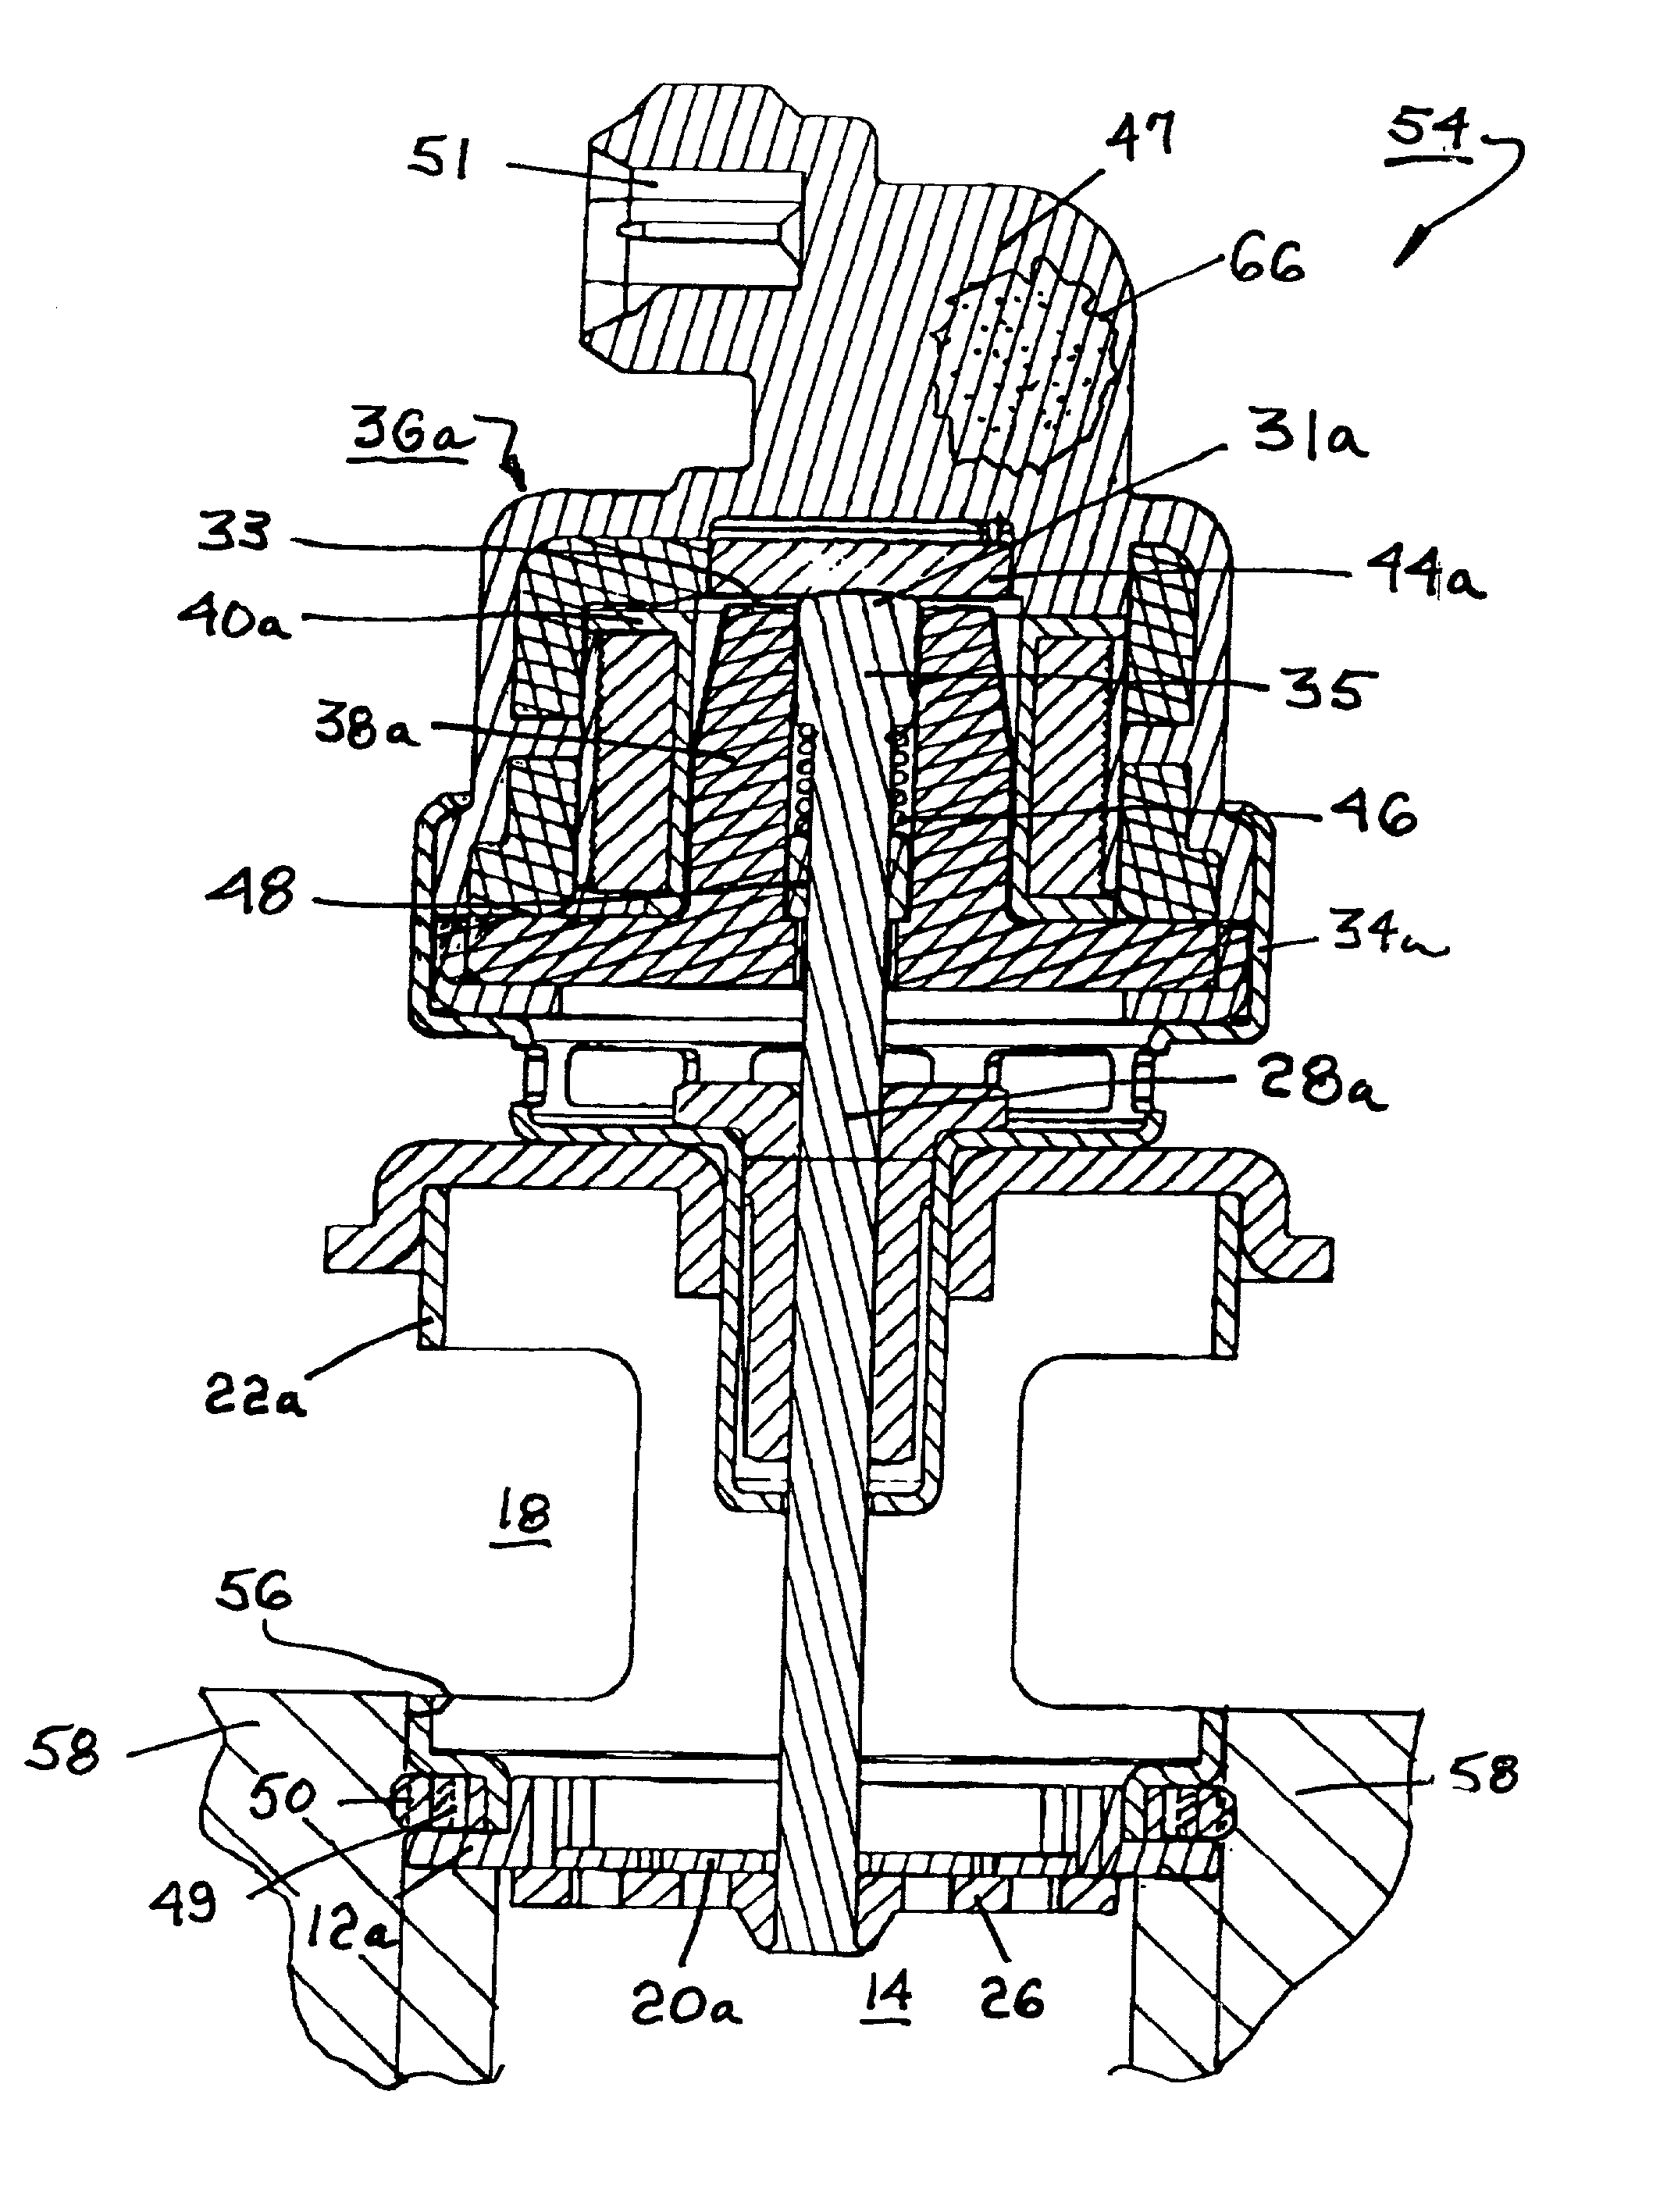 Short-stroke valve assembly for modulated pulsewidth flow control